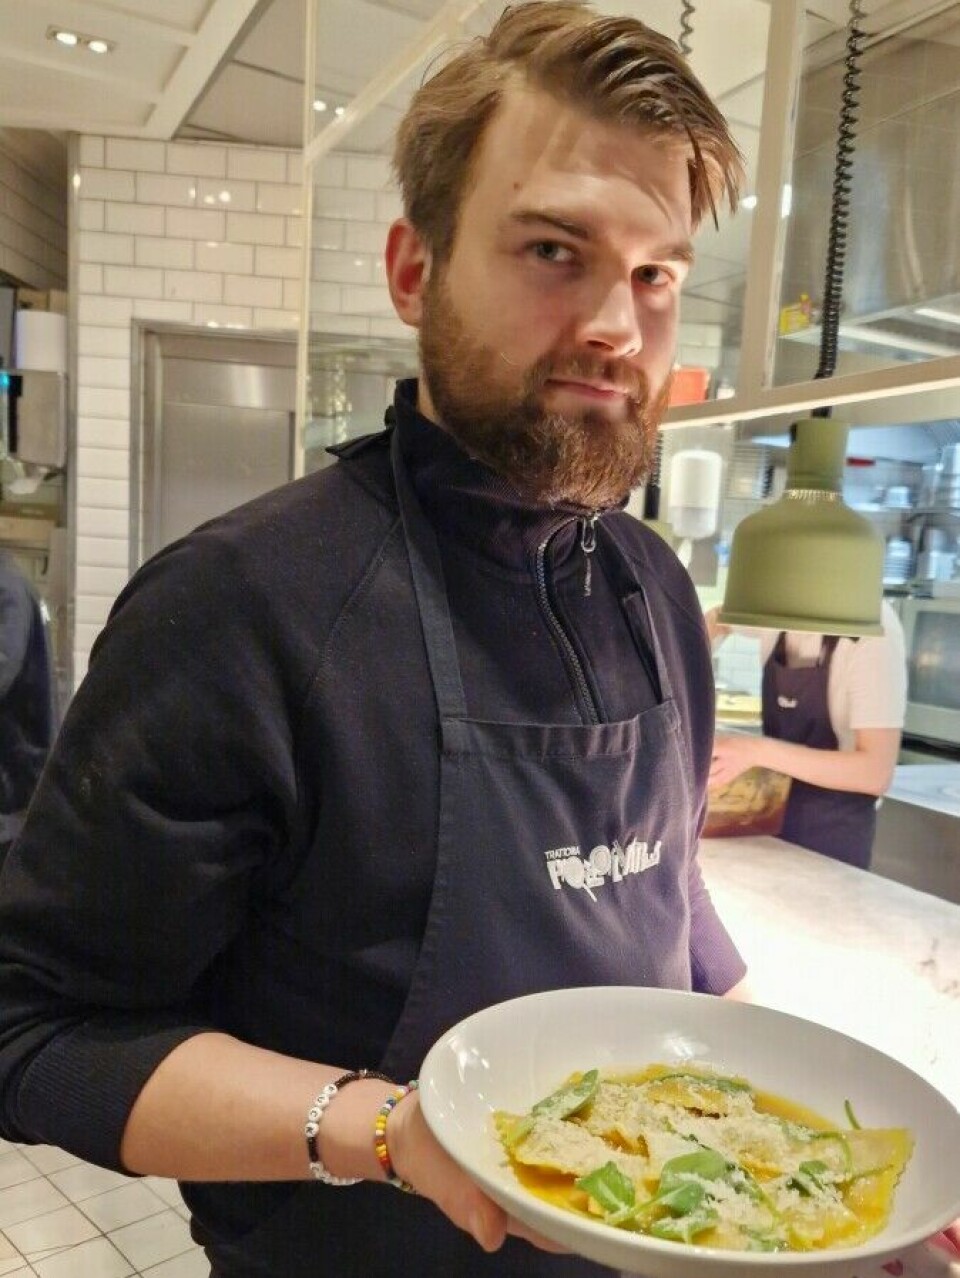 Christopher Christiansen is head chef at Trattoria Popolare. The restaurant’s most popular dish is ravioli with oxtail.